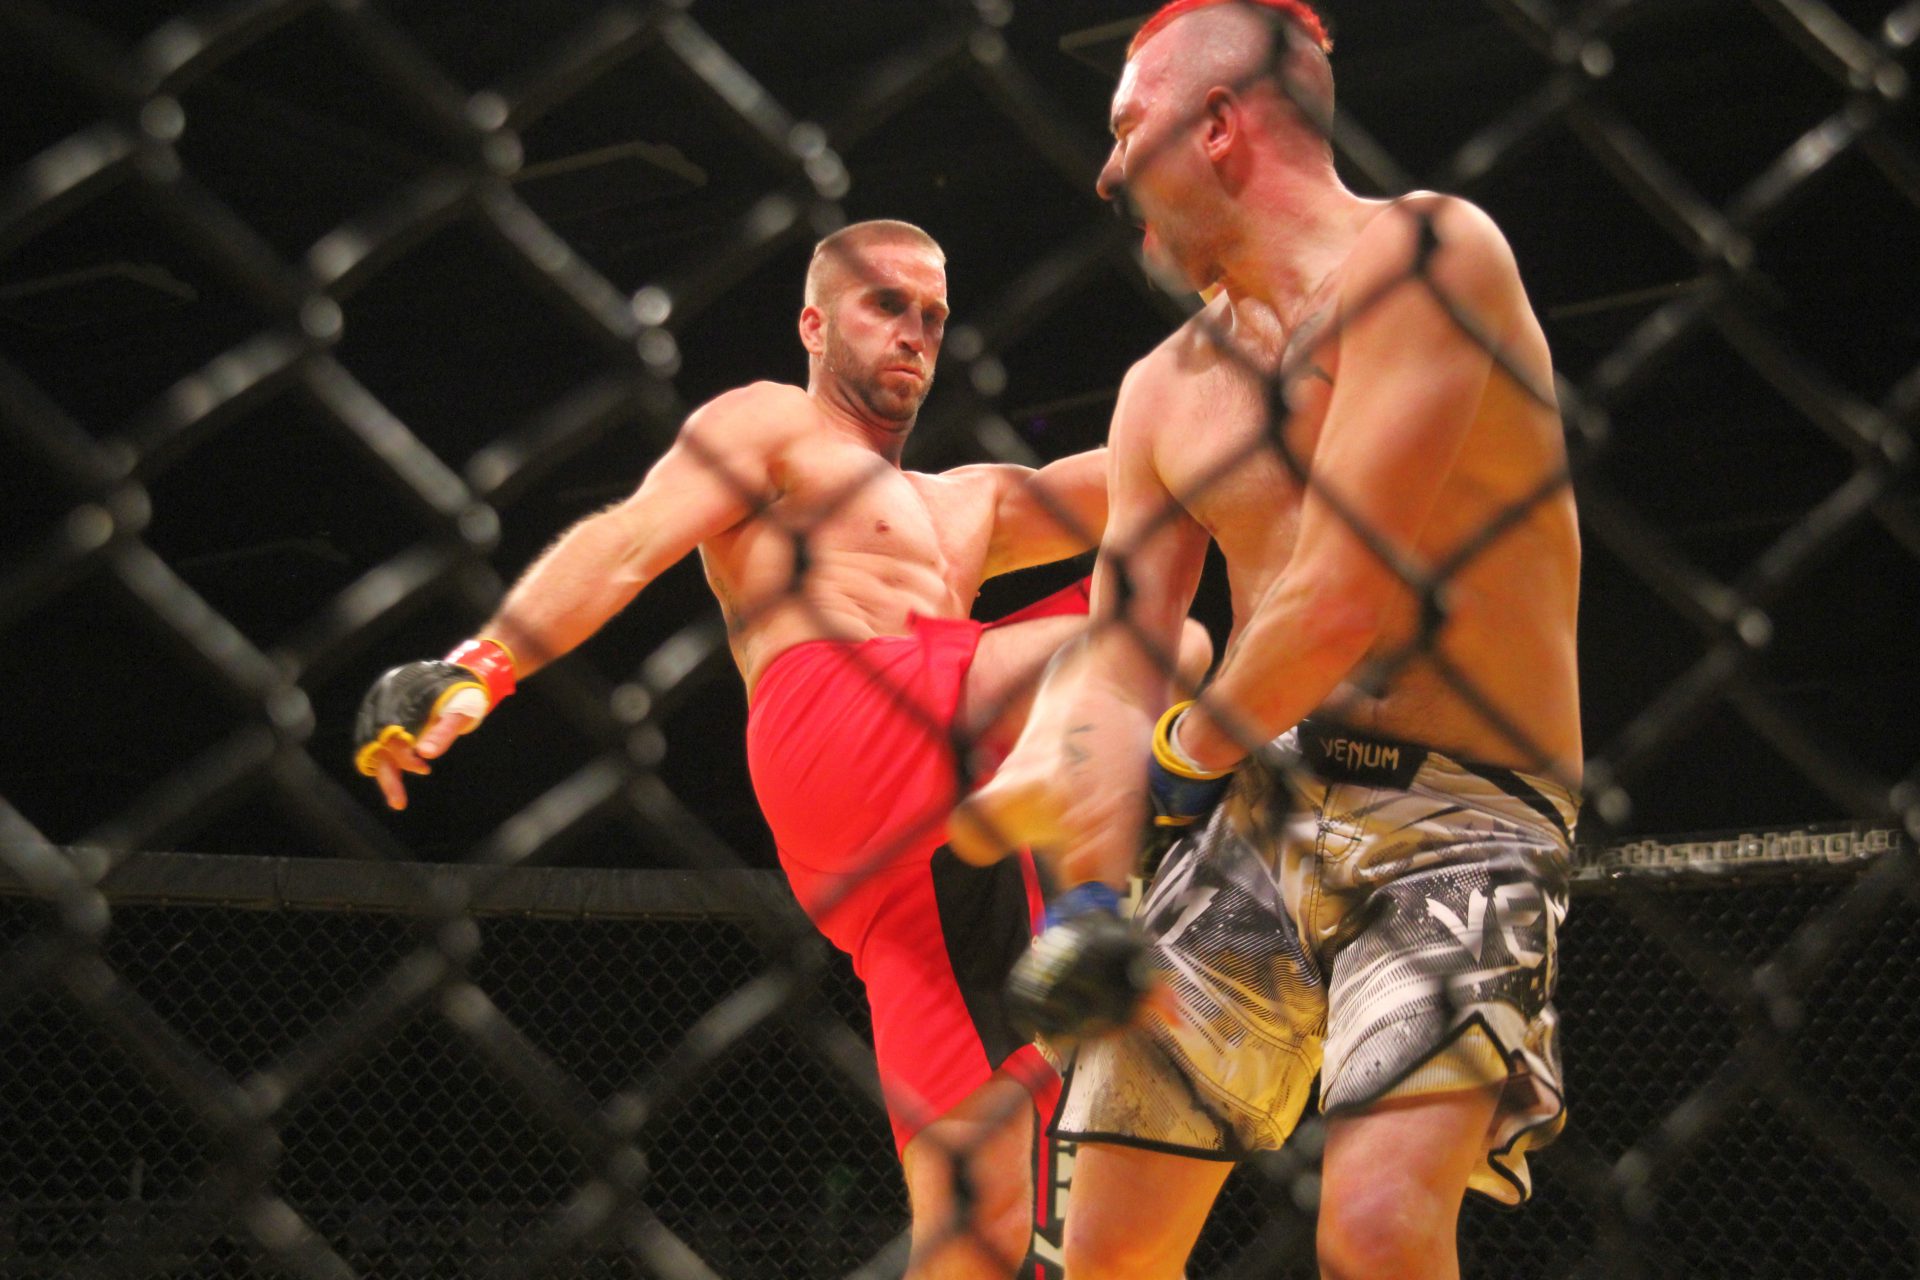 Local fighter wins with head kick in professional debut